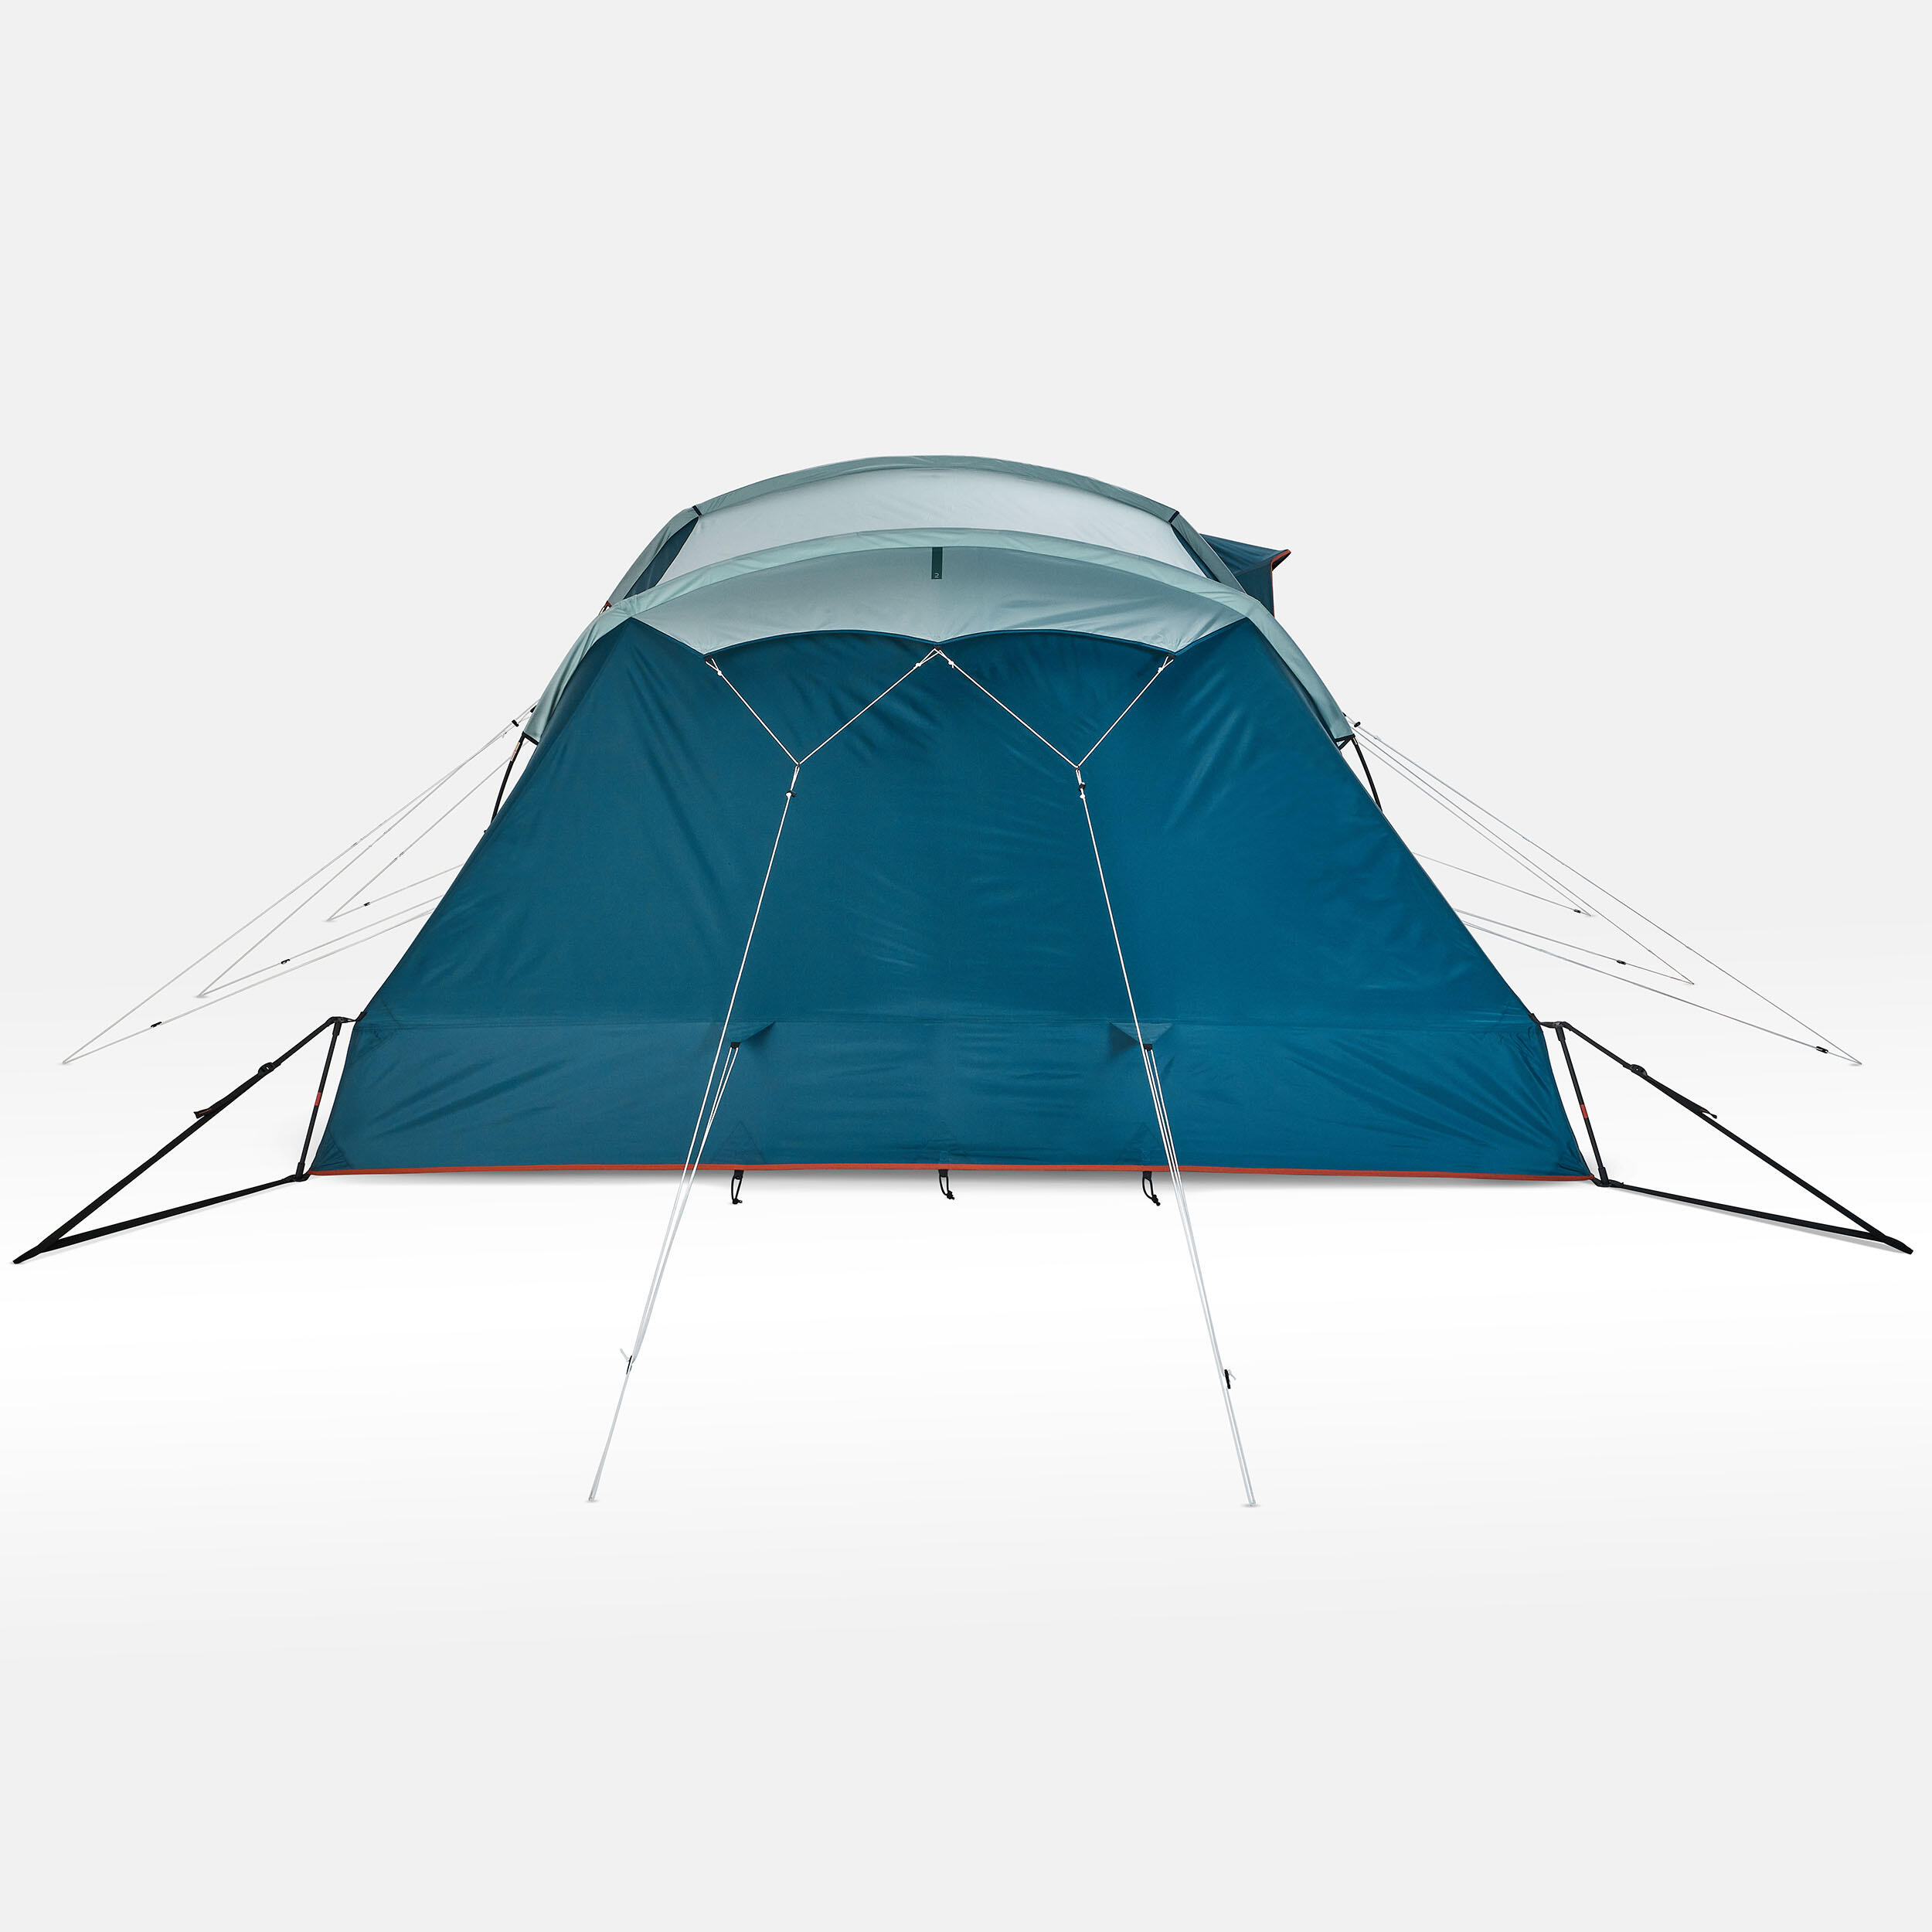 8 Man Tent With Poles - Arpenaz 8.4 13/33